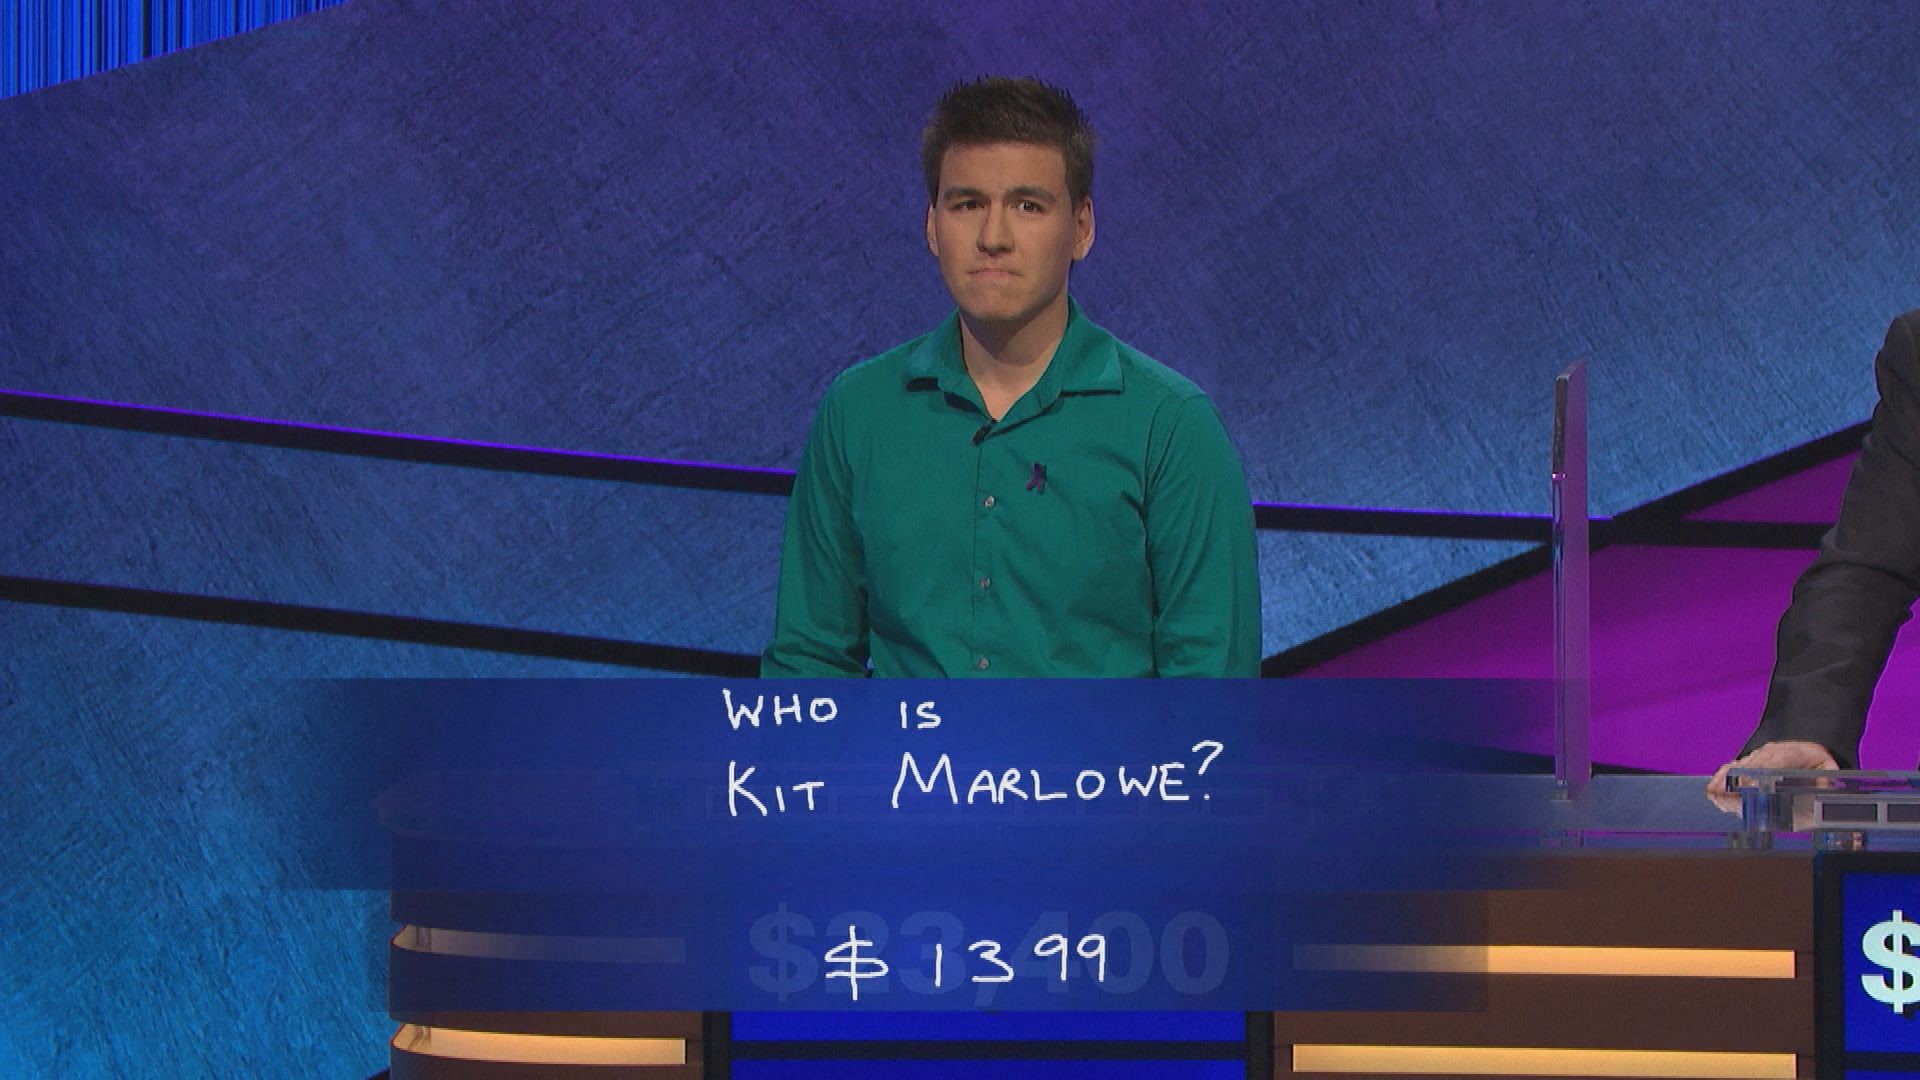 All good things must come to an end.

For “Jeopardy!” superstar James Holzhauer, it means walking away with just under $2.5 million. It could be worse!

Holzhauer fell short during Monday’s episode, losing to contestant Emma Boettcher with the correct response: “Who is Kit Marlowe?” – the 16th-century English playwright.

But Holzhauer bet just $1,399 – a low wager for him – to increase his day’s total from $23,400 to $24,799, while Boettcher put down $20,201 of her $26,600, making her the winner at $46,801.